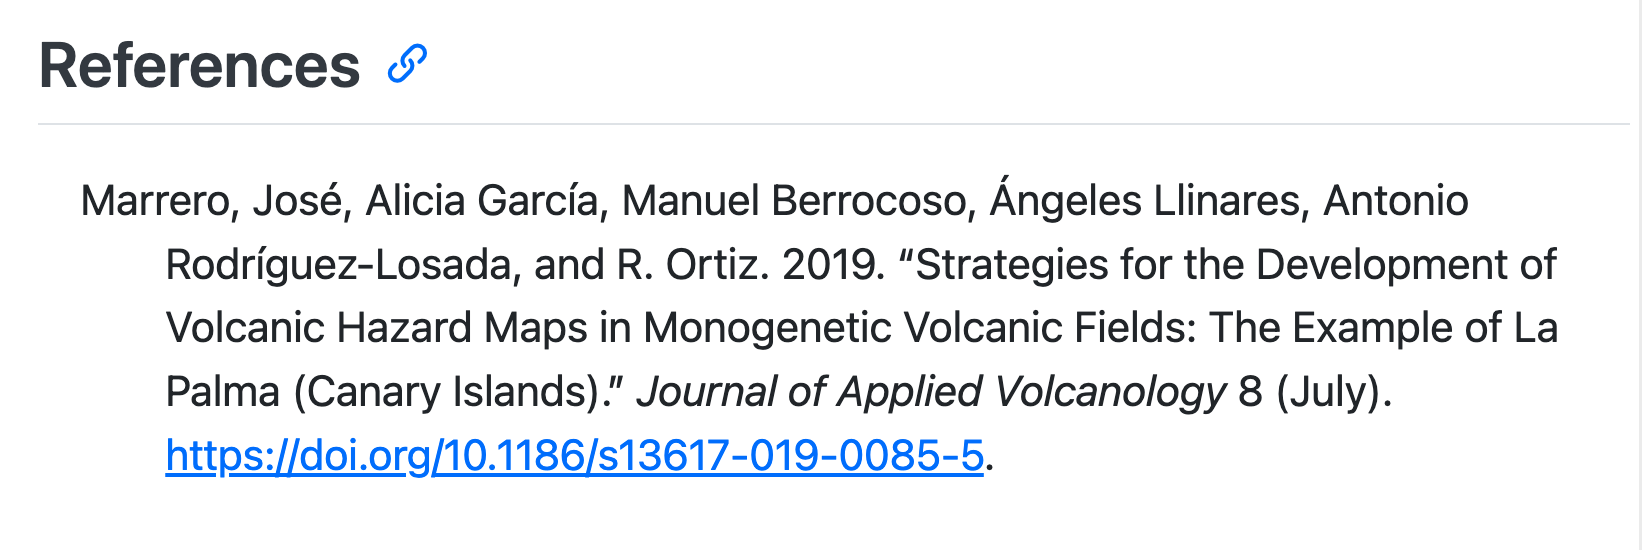 Screenshot of the rendered article showing a section titled References. Below the title is a full reference starting 'Marrero, José, '.